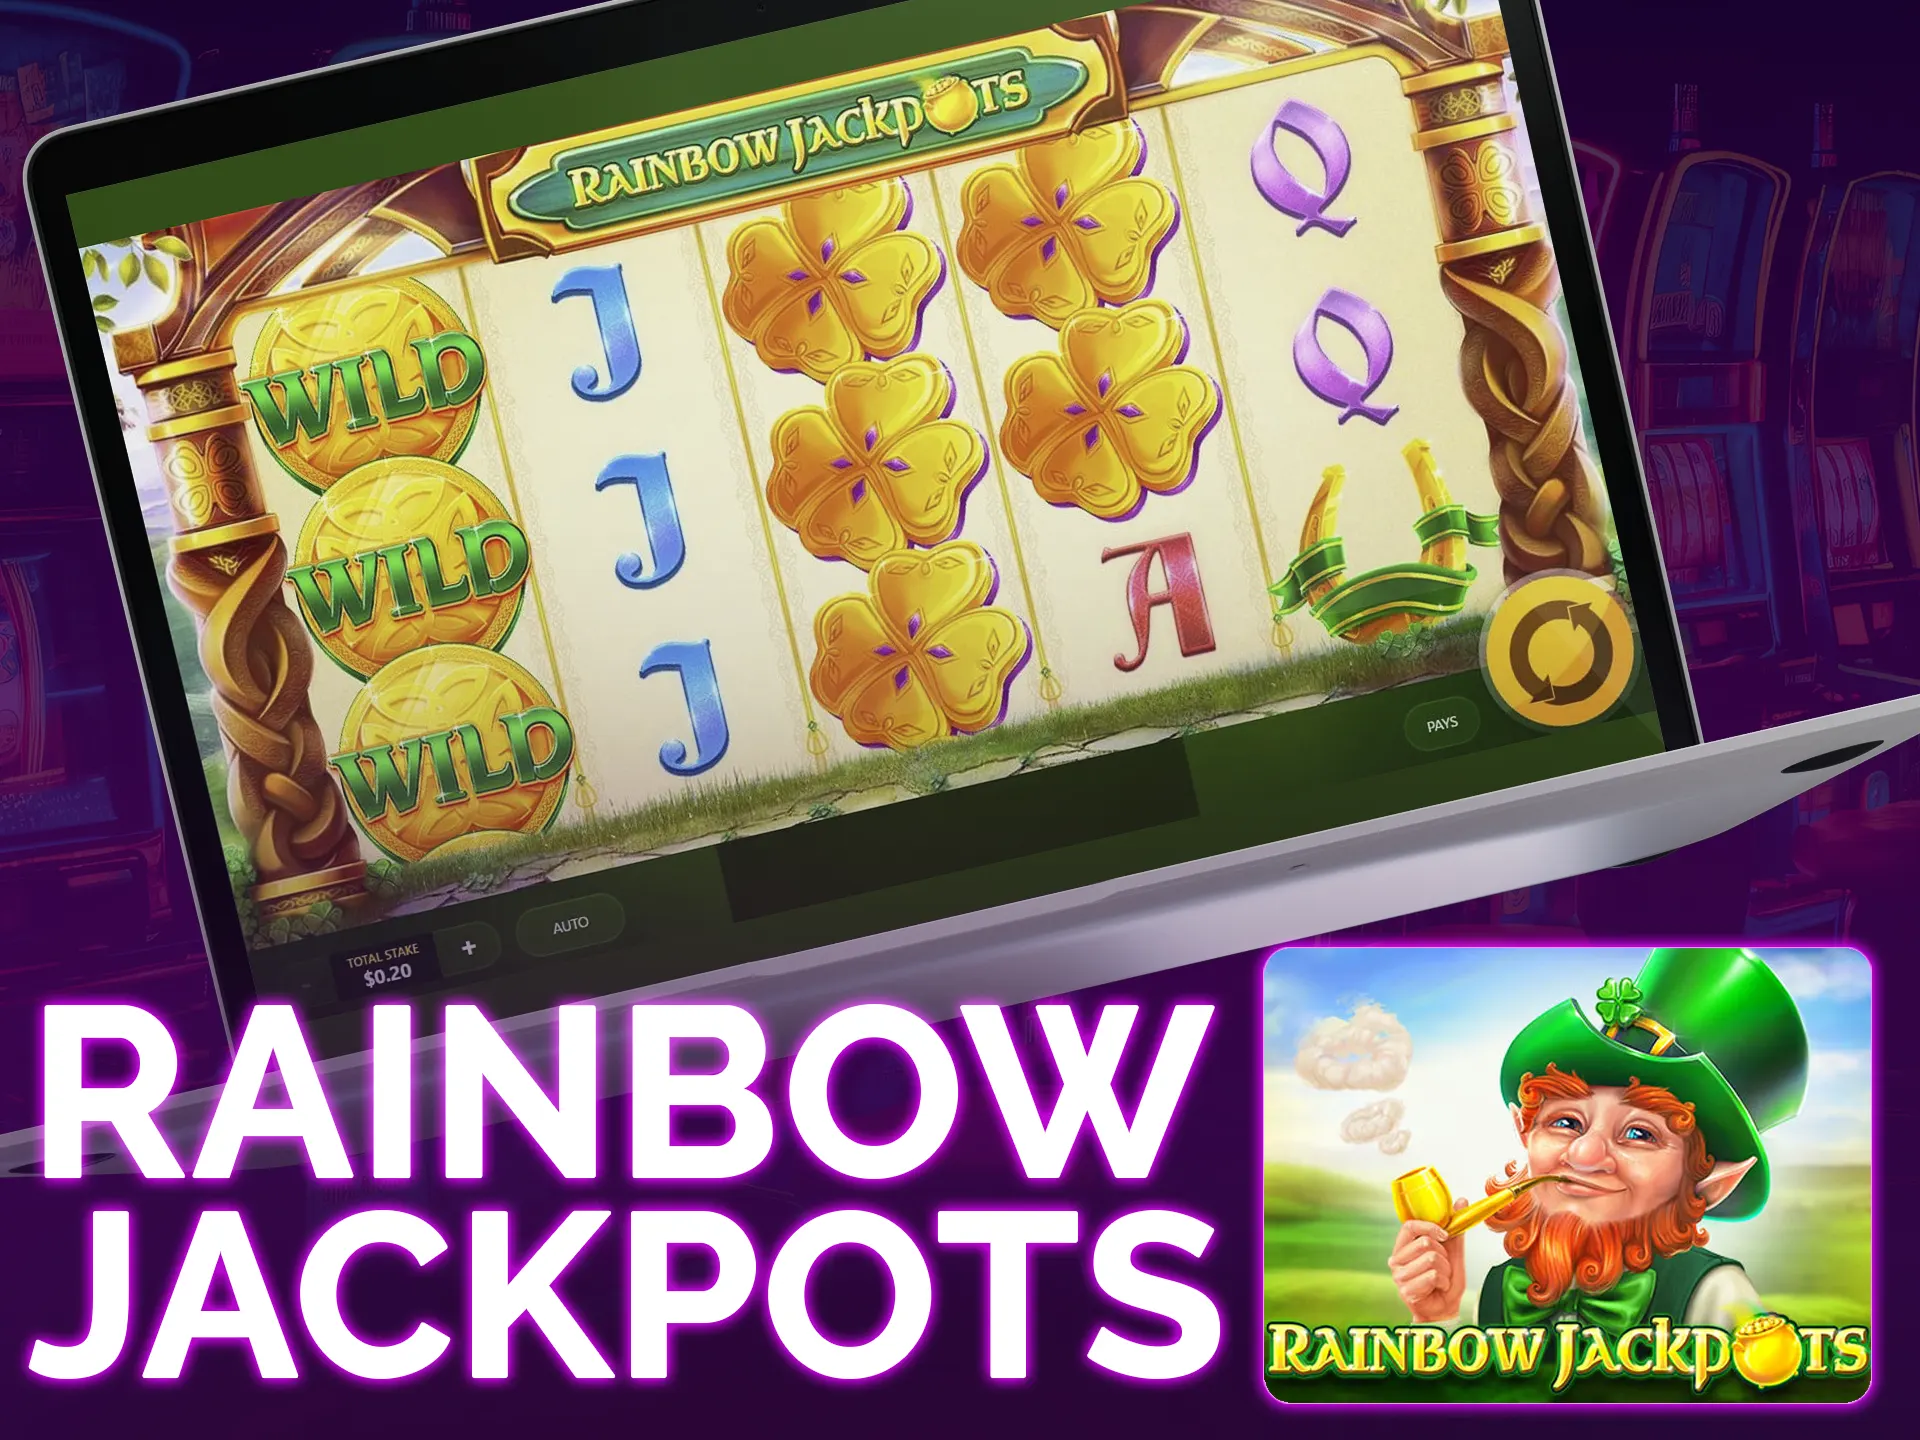 Red Tiger's Rainbow Jackpots slot with 20 paylines, bonus features, and potential x800 winnings.